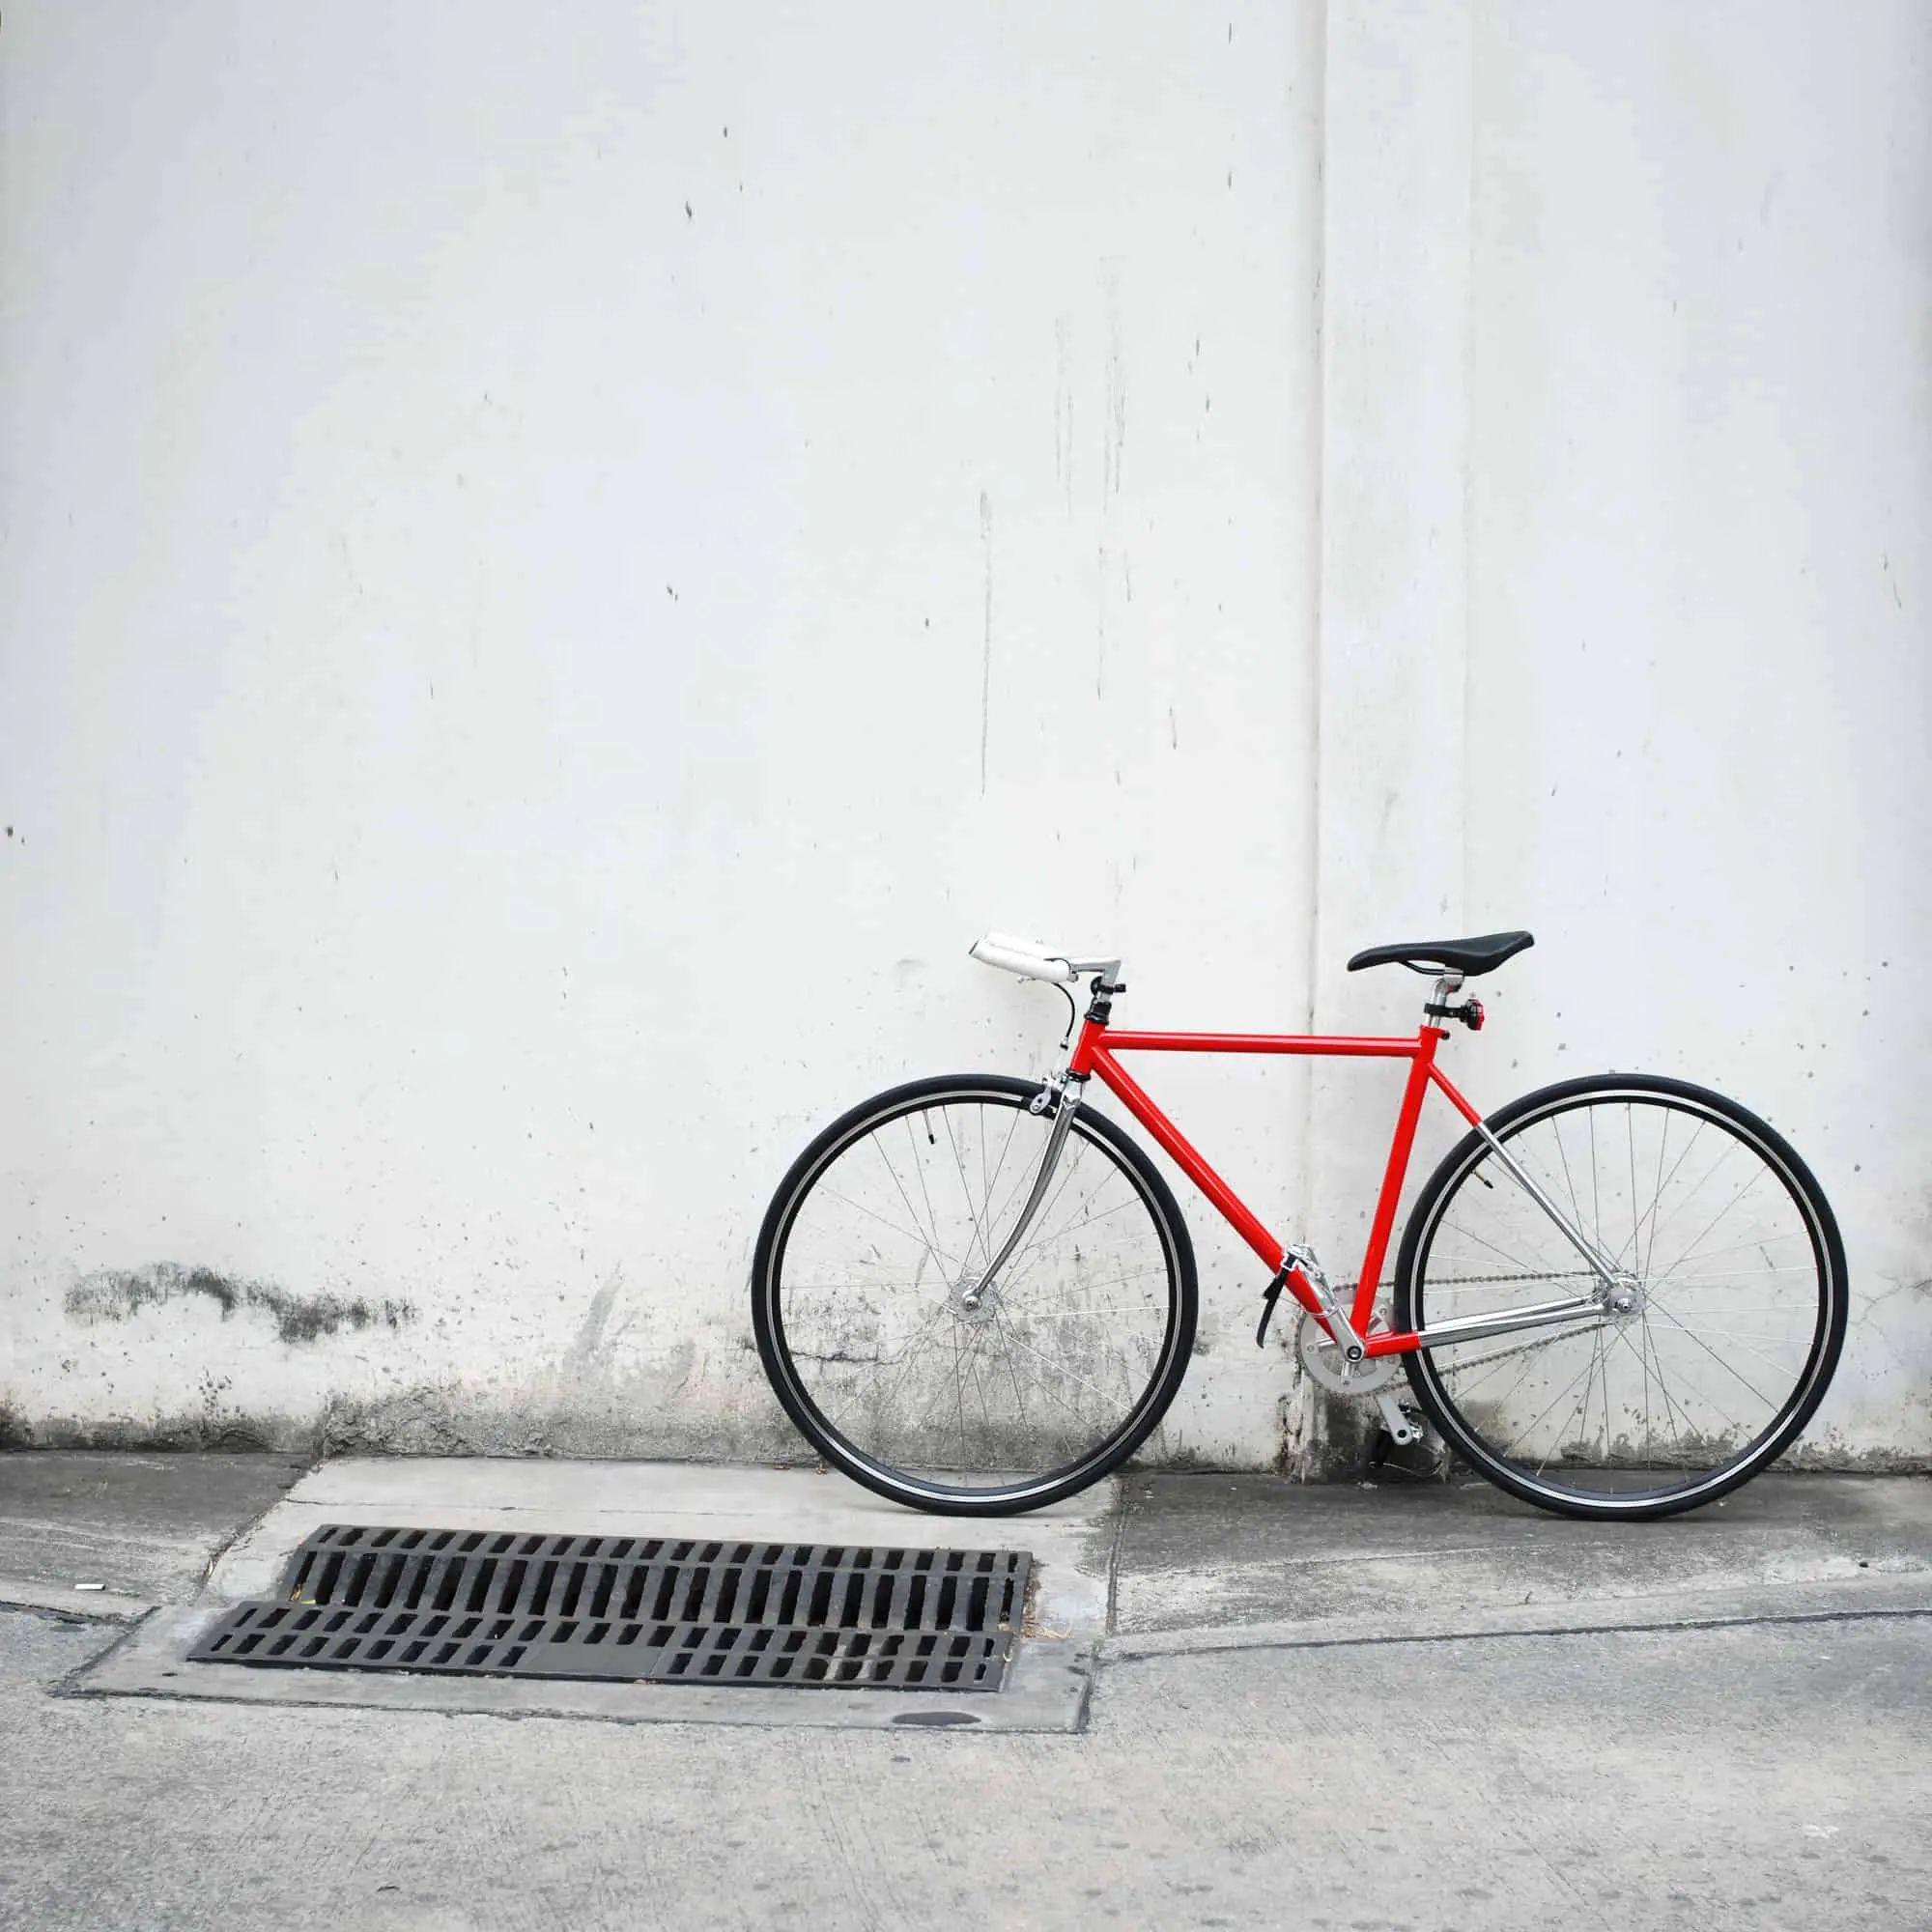 Modern bicycle with a bright red frame leaning on white wall